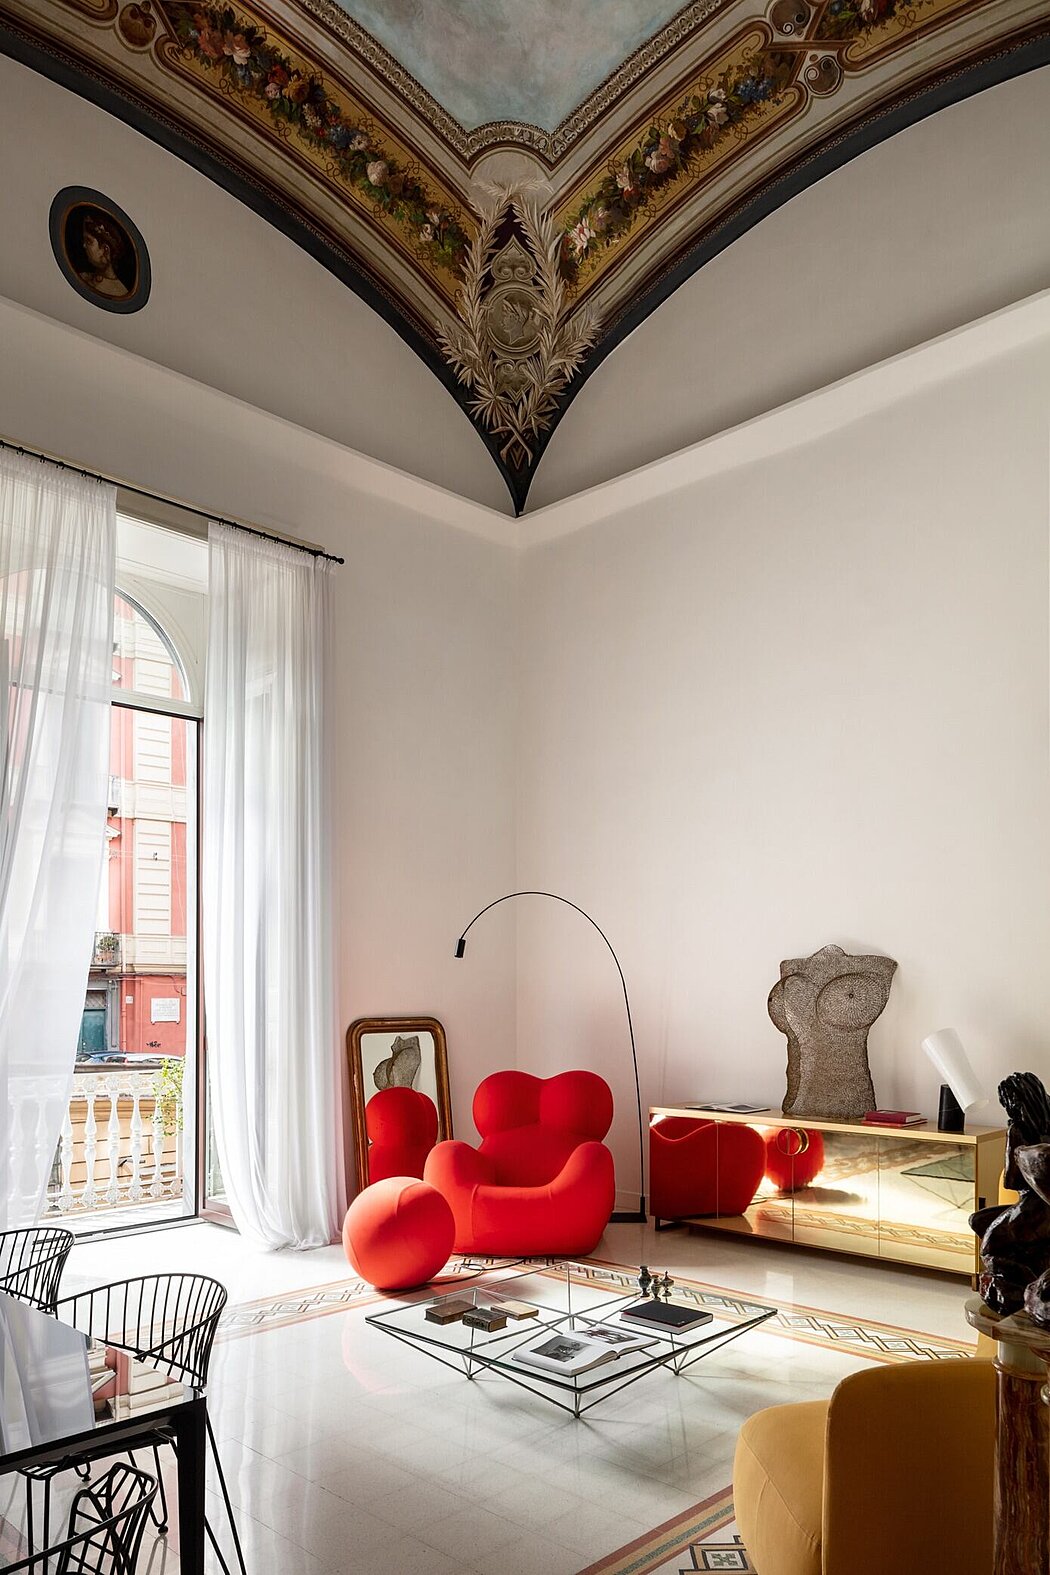 Napoli Velata: A Blend of Baroque Artistry and Contemporary Chic - 1